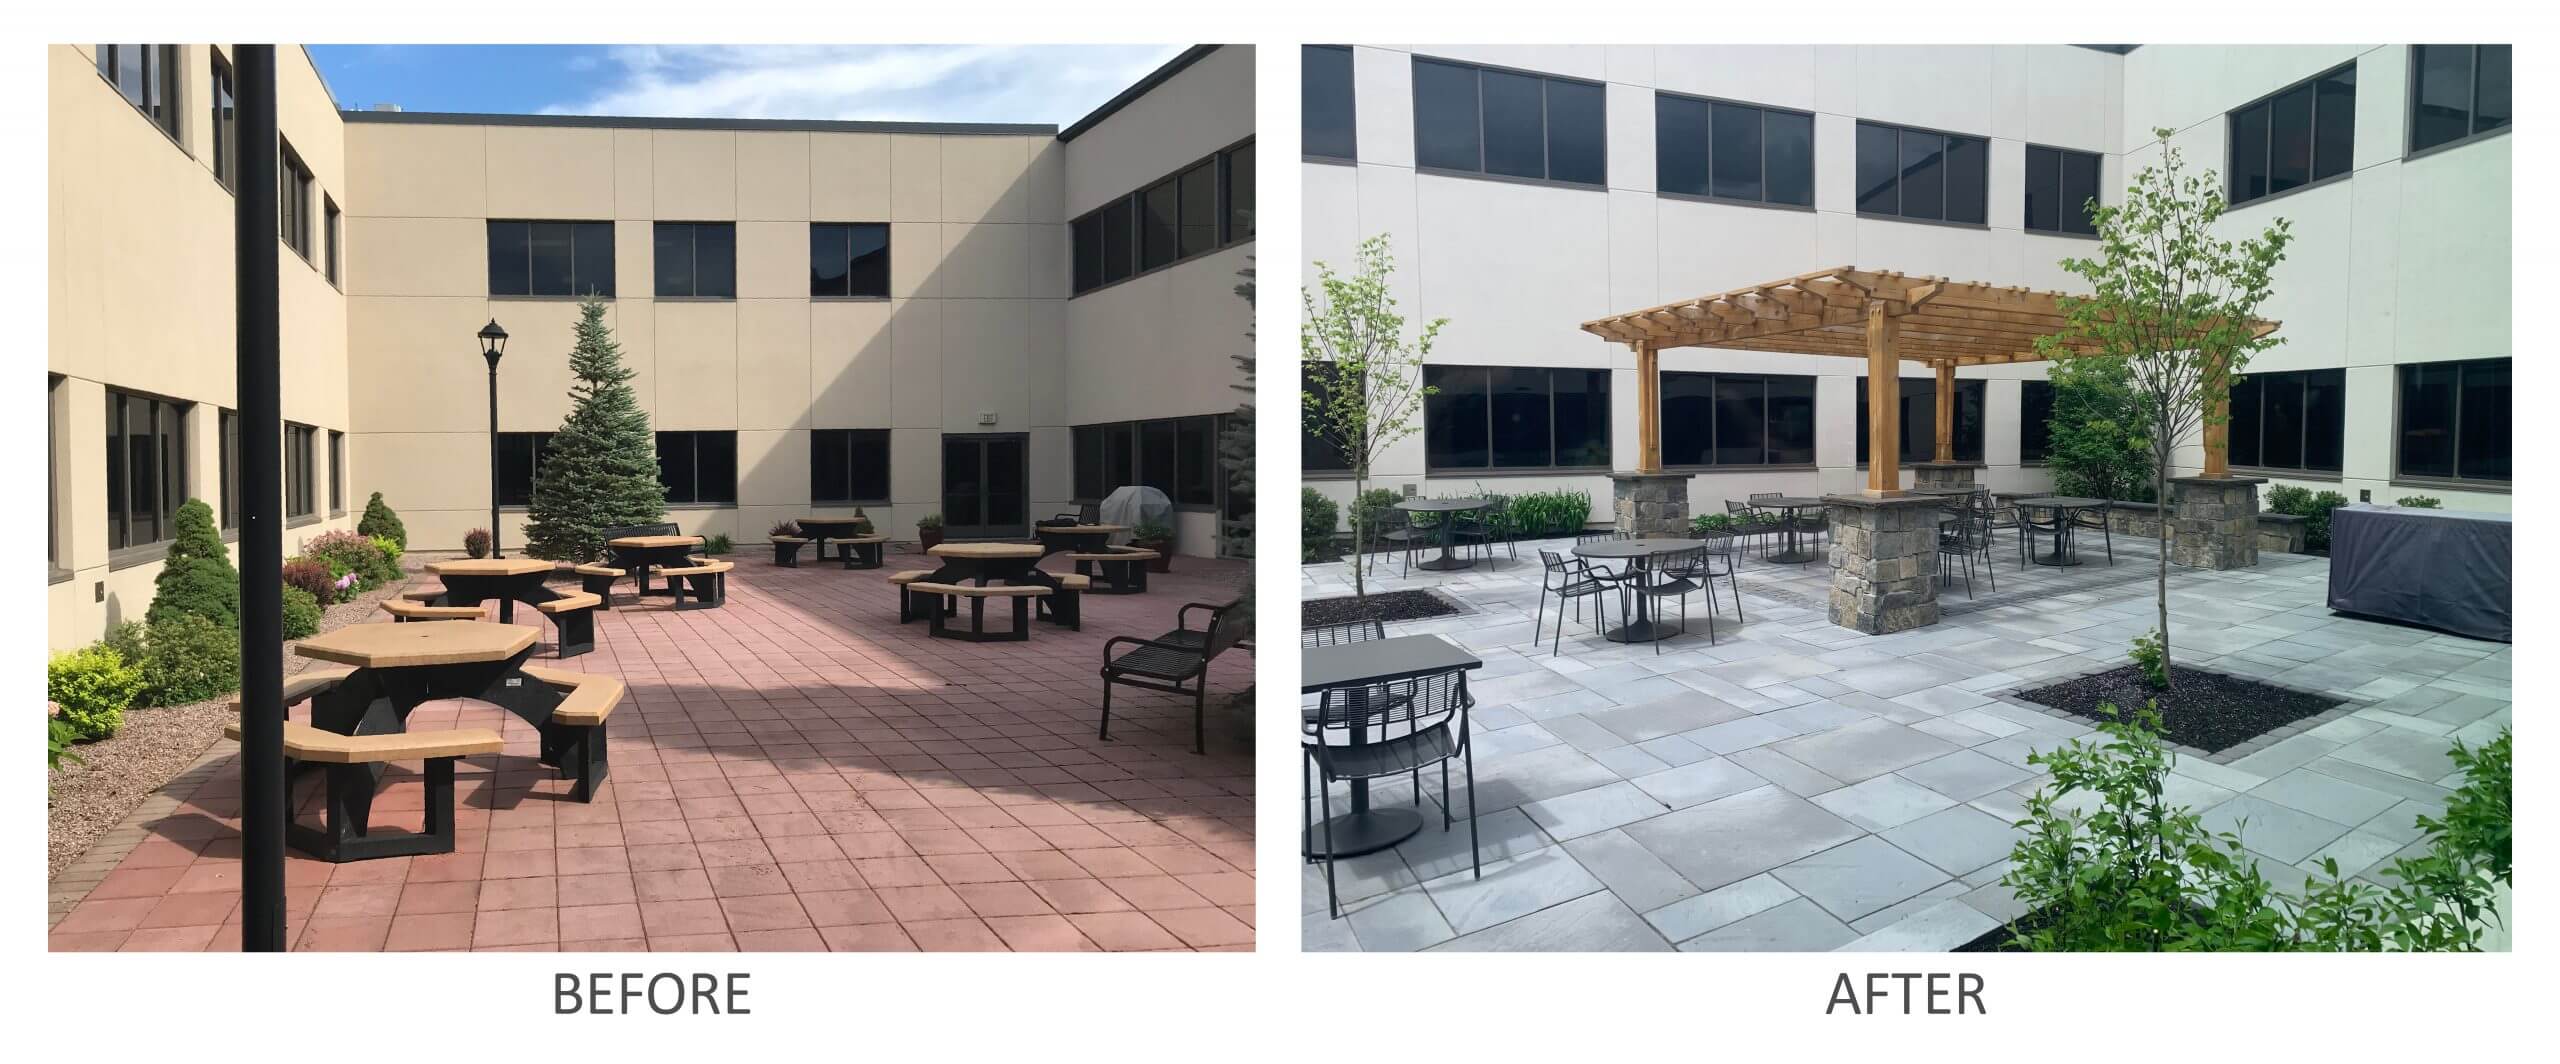 Before and after comparison of interior courtyard